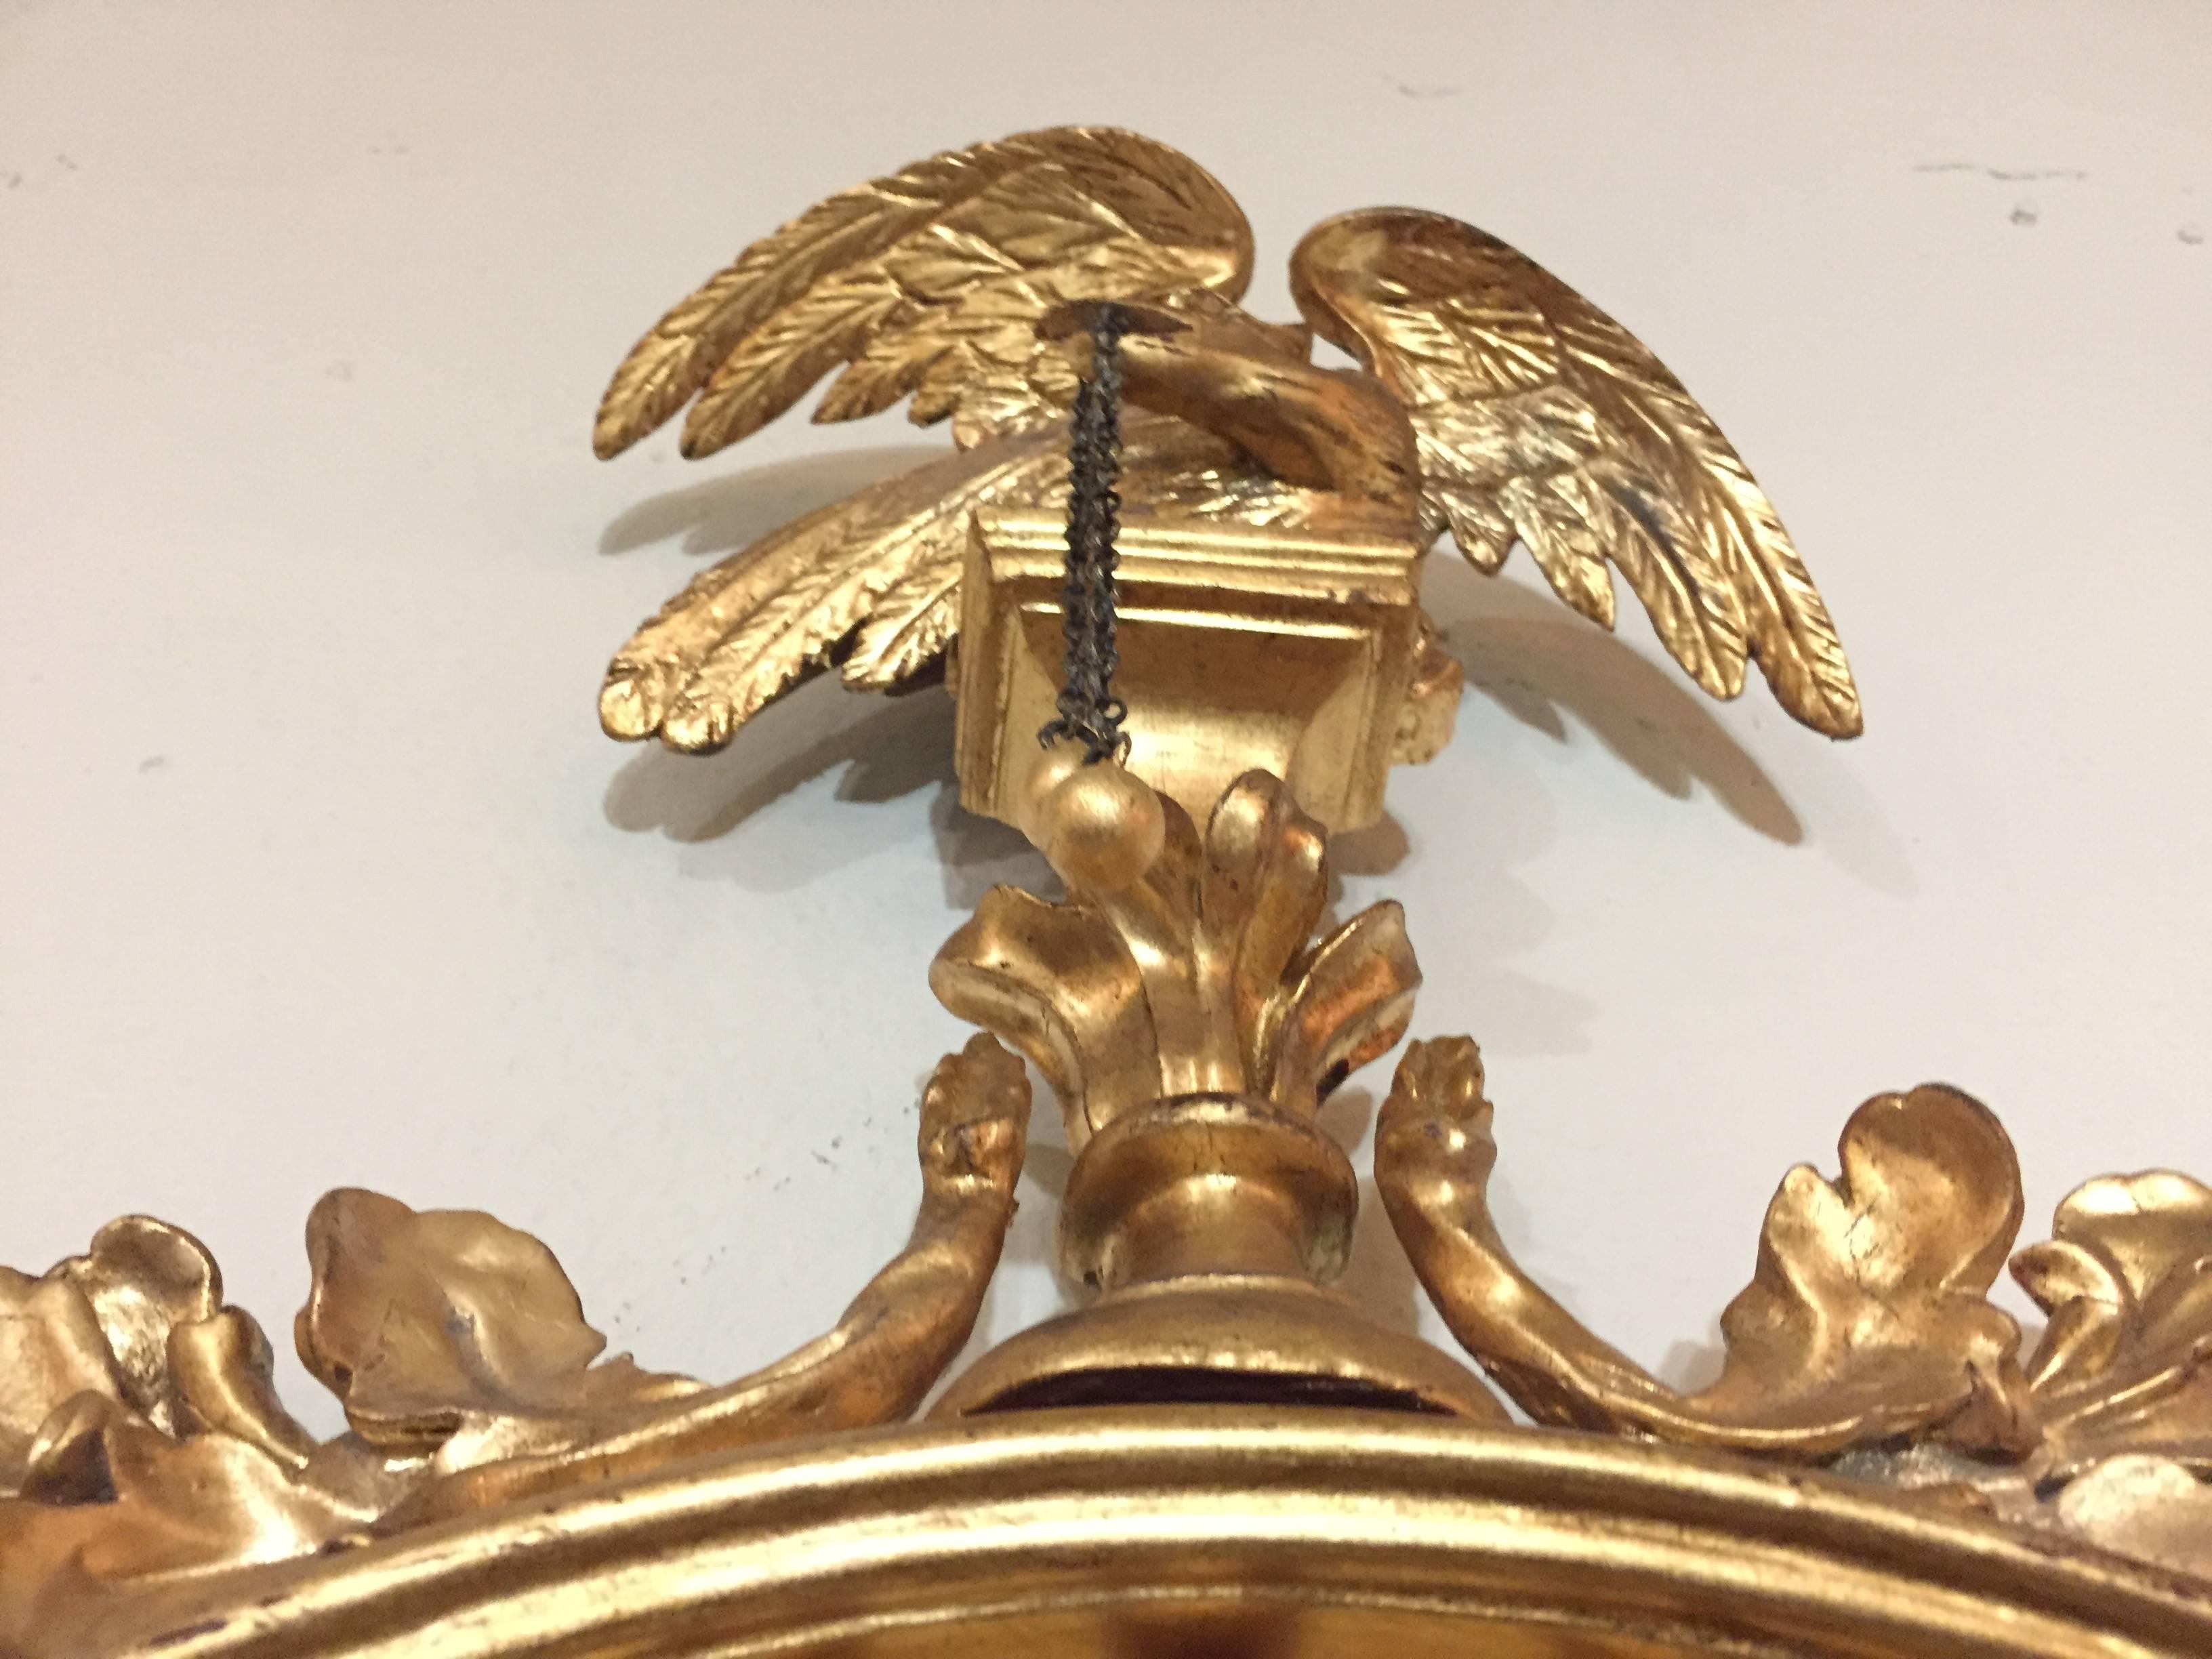 A late 19th or very early 20th century Federal style convex mirror ebony and gilt decorated adorning an eagle winged crest. This antique federal style wall or console mirror is detailed with the finest carvings. The top depicting a wonderfully